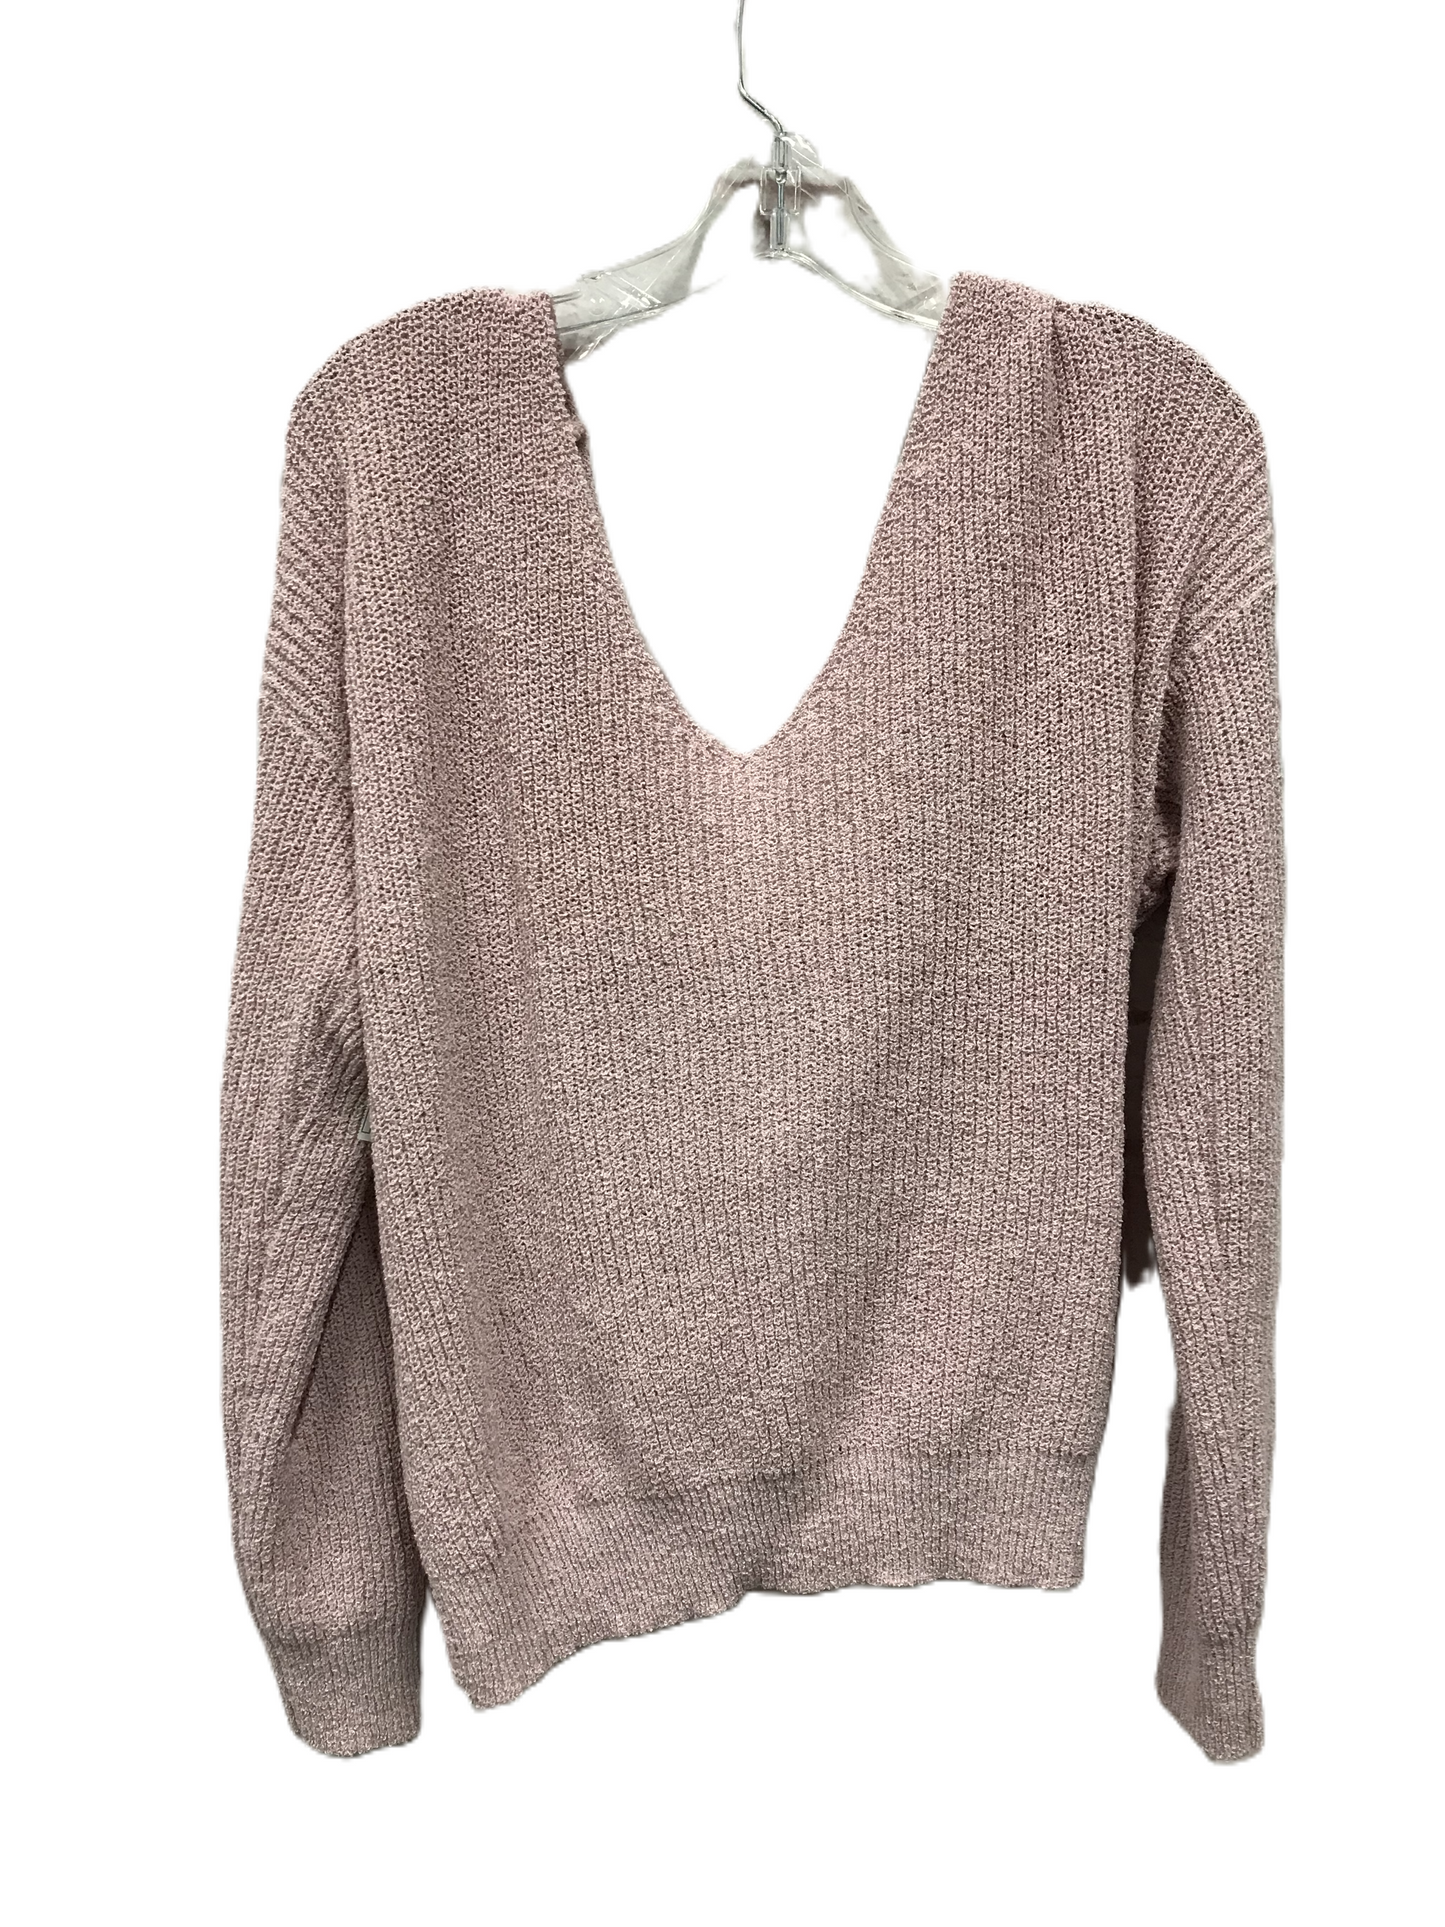 Pink Sweater By Line & Dot, Size: L